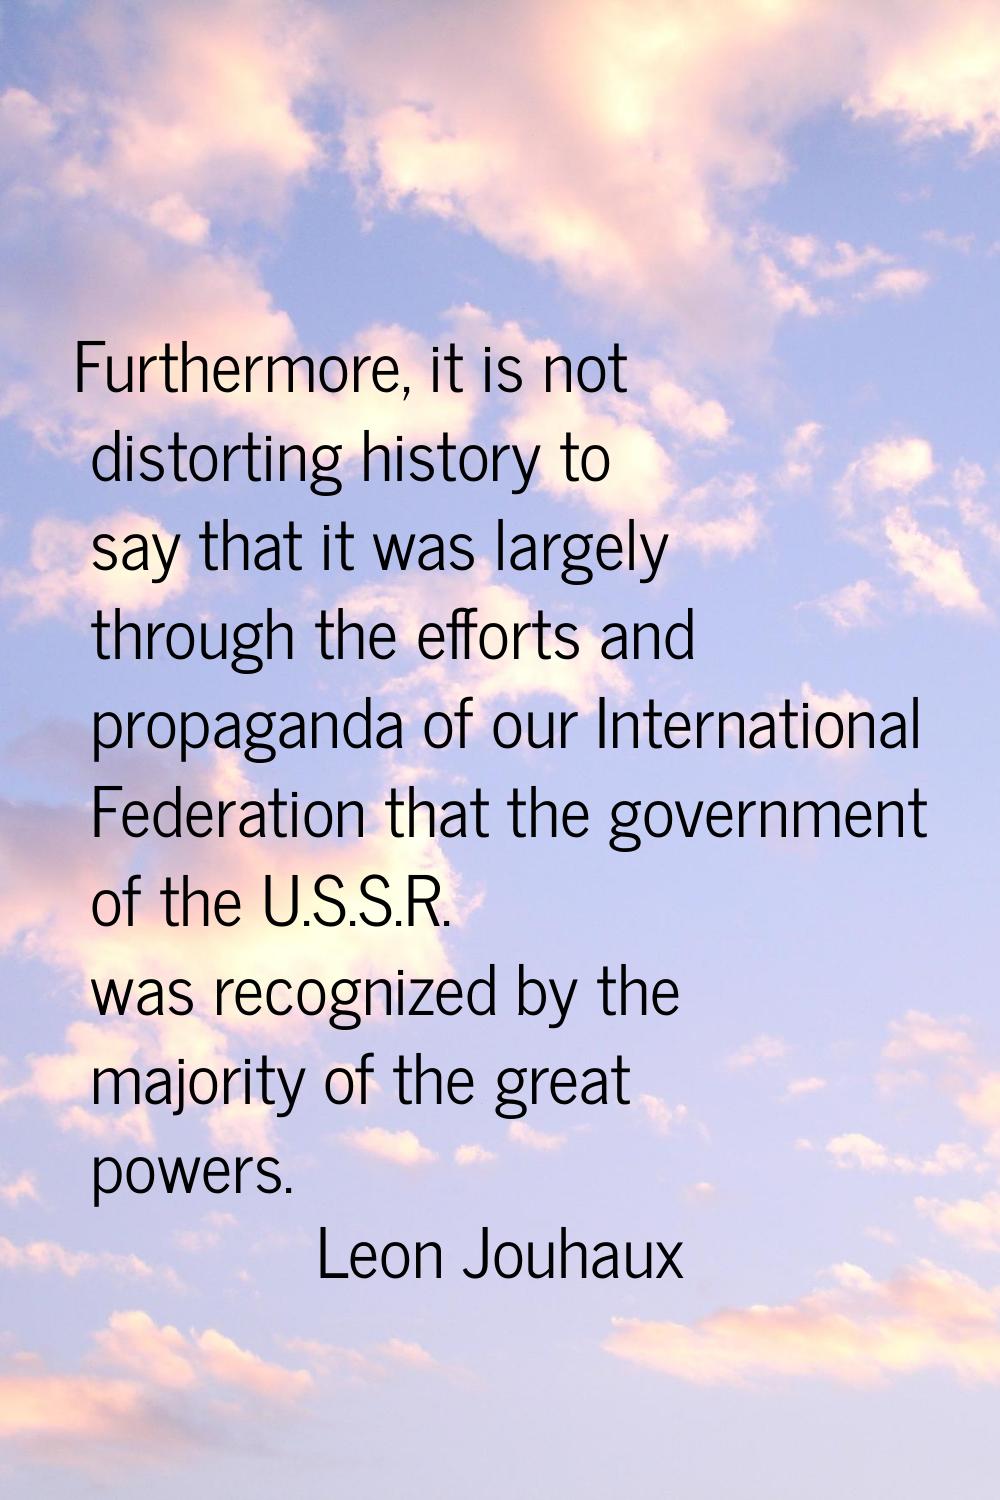 Furthermore, it is not distorting history to say that it was largely through the efforts and propag